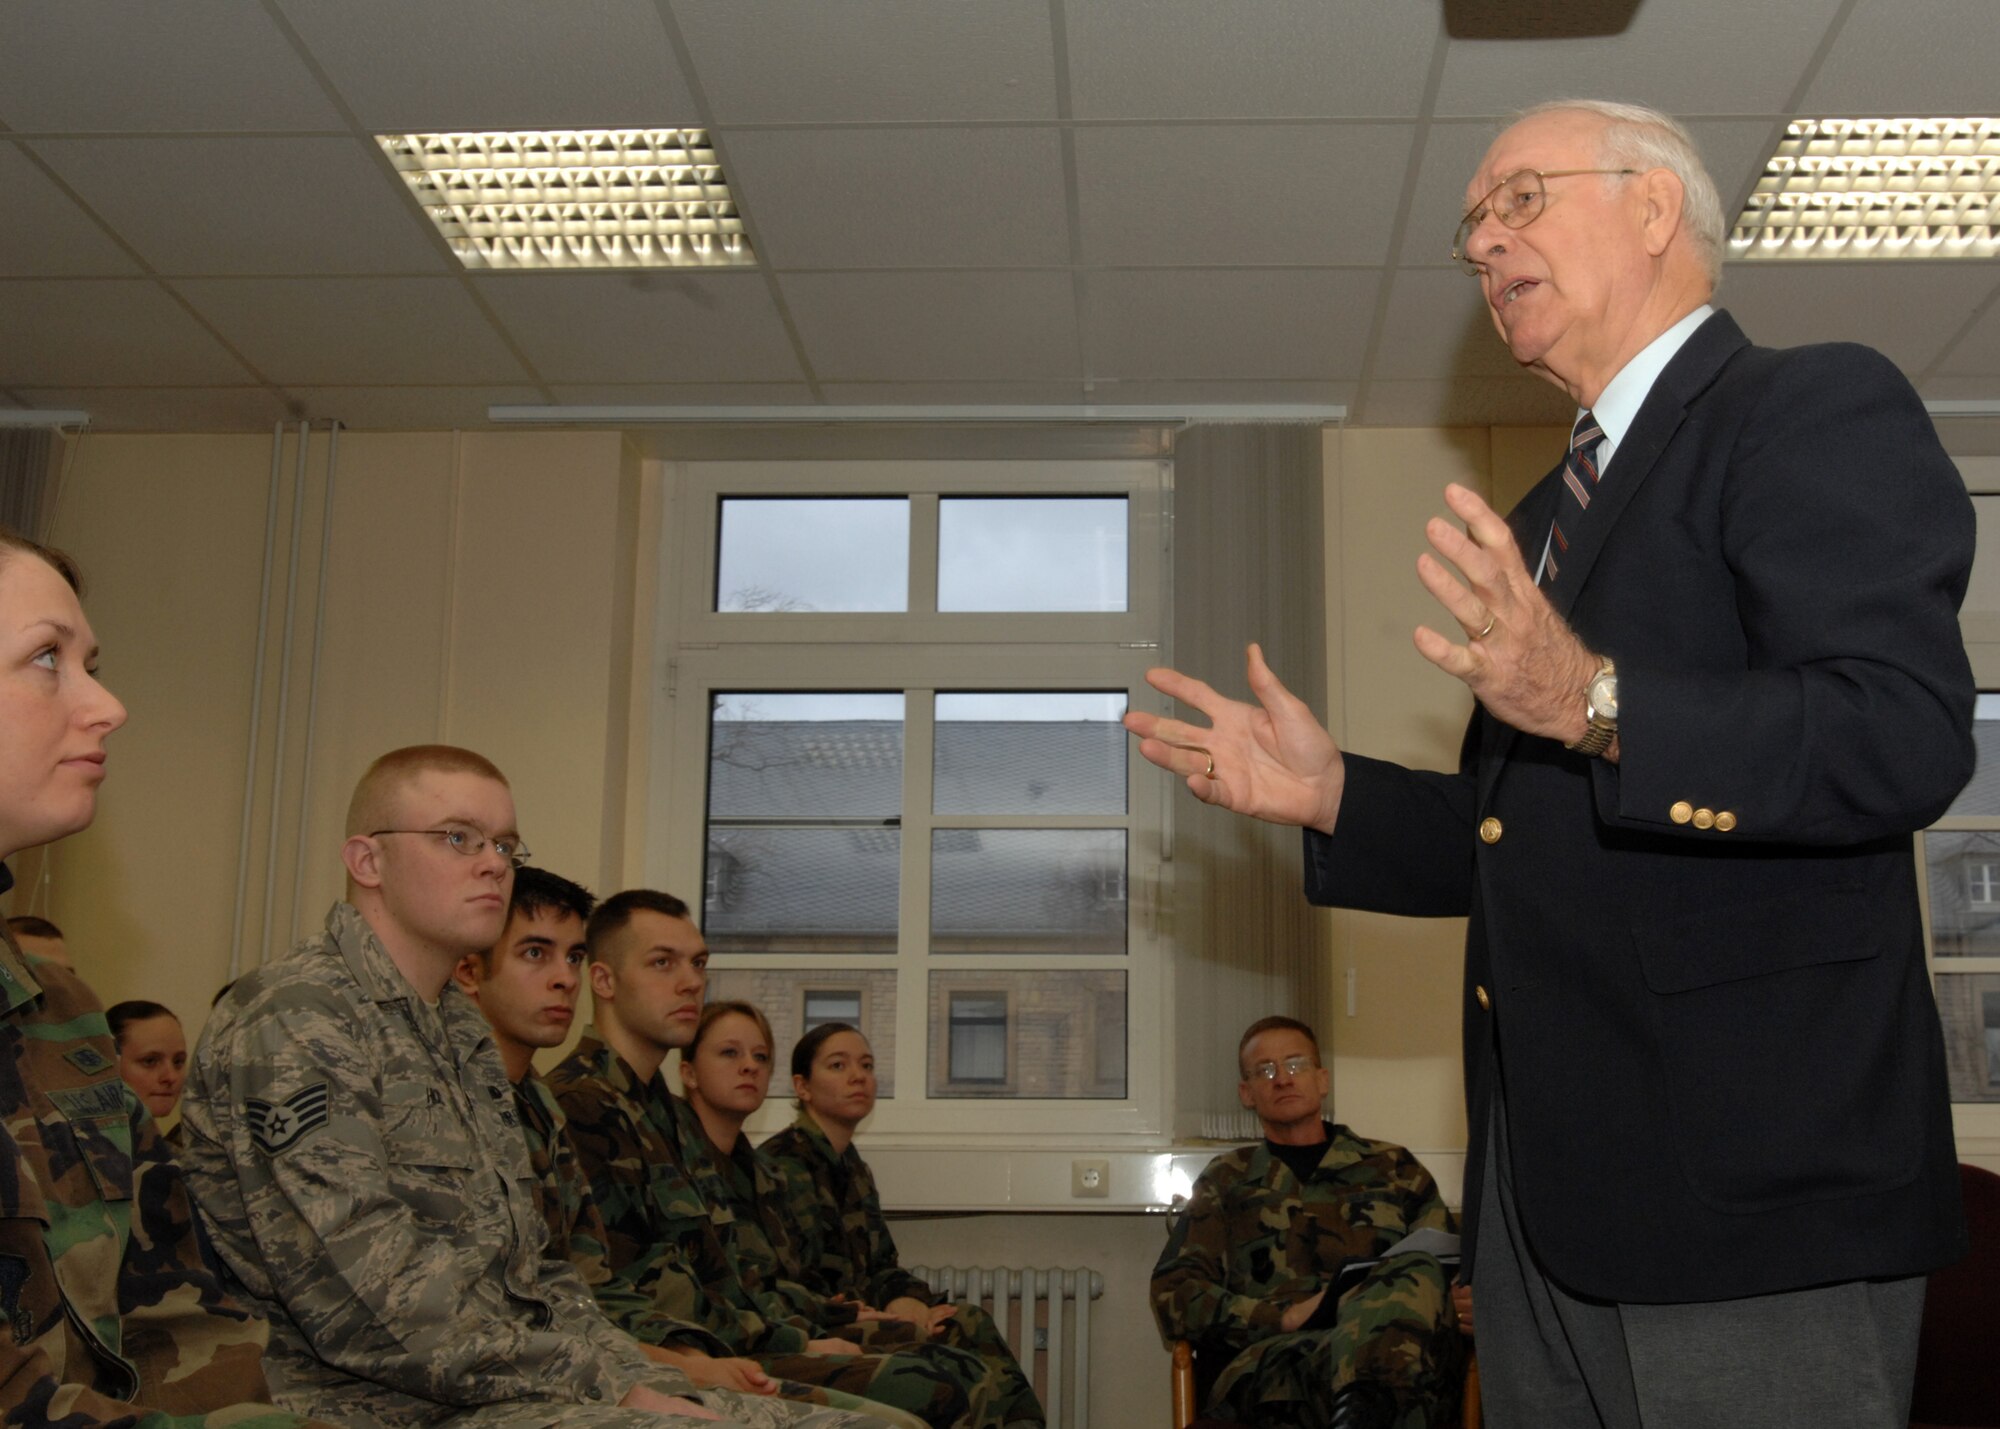 SPANGDAHLEM IAR BASE, Germany -- Retired Chief Master Sgt. of the Air Force Sam Parish speaks to Airmen at the Pitsenberger Airman Leadership School Jan. 18, 2008. Chief Parish spoke about the importance of the enlisted corps in the Air Force and how much the level of education and expectations has increased. (U.S. Air Force photo/Airman 1st Class Jenifer Calhoun)